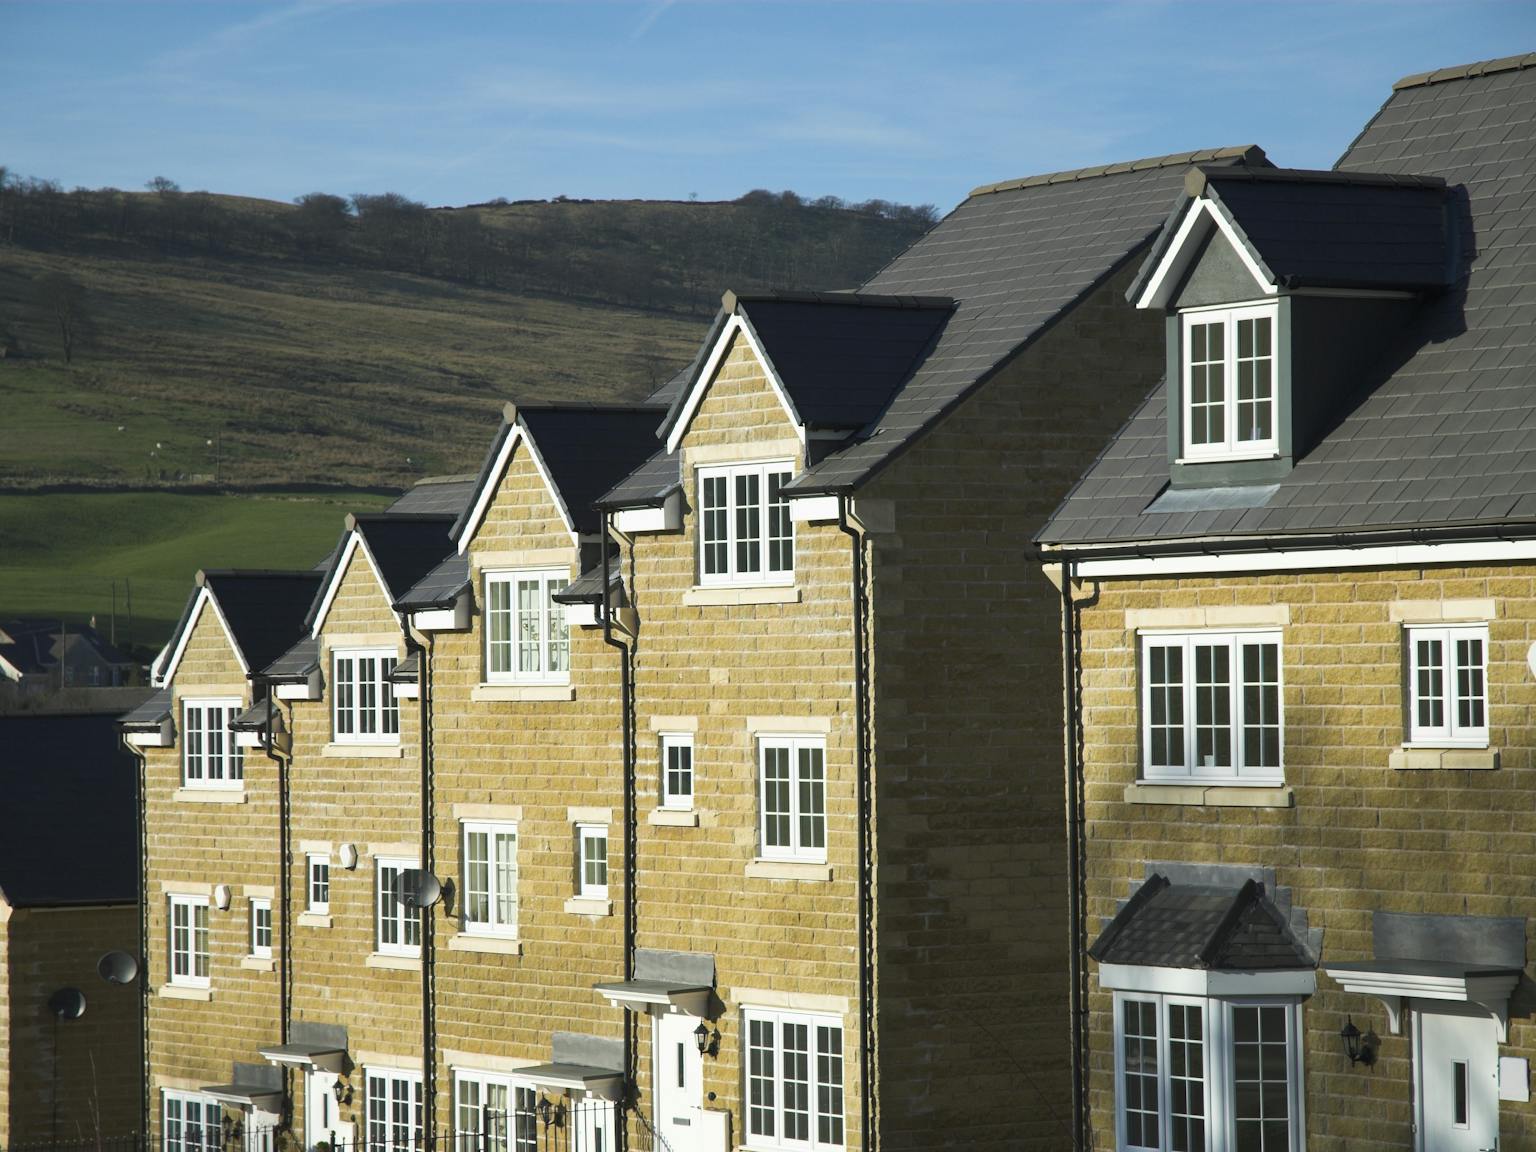 Row of new houses